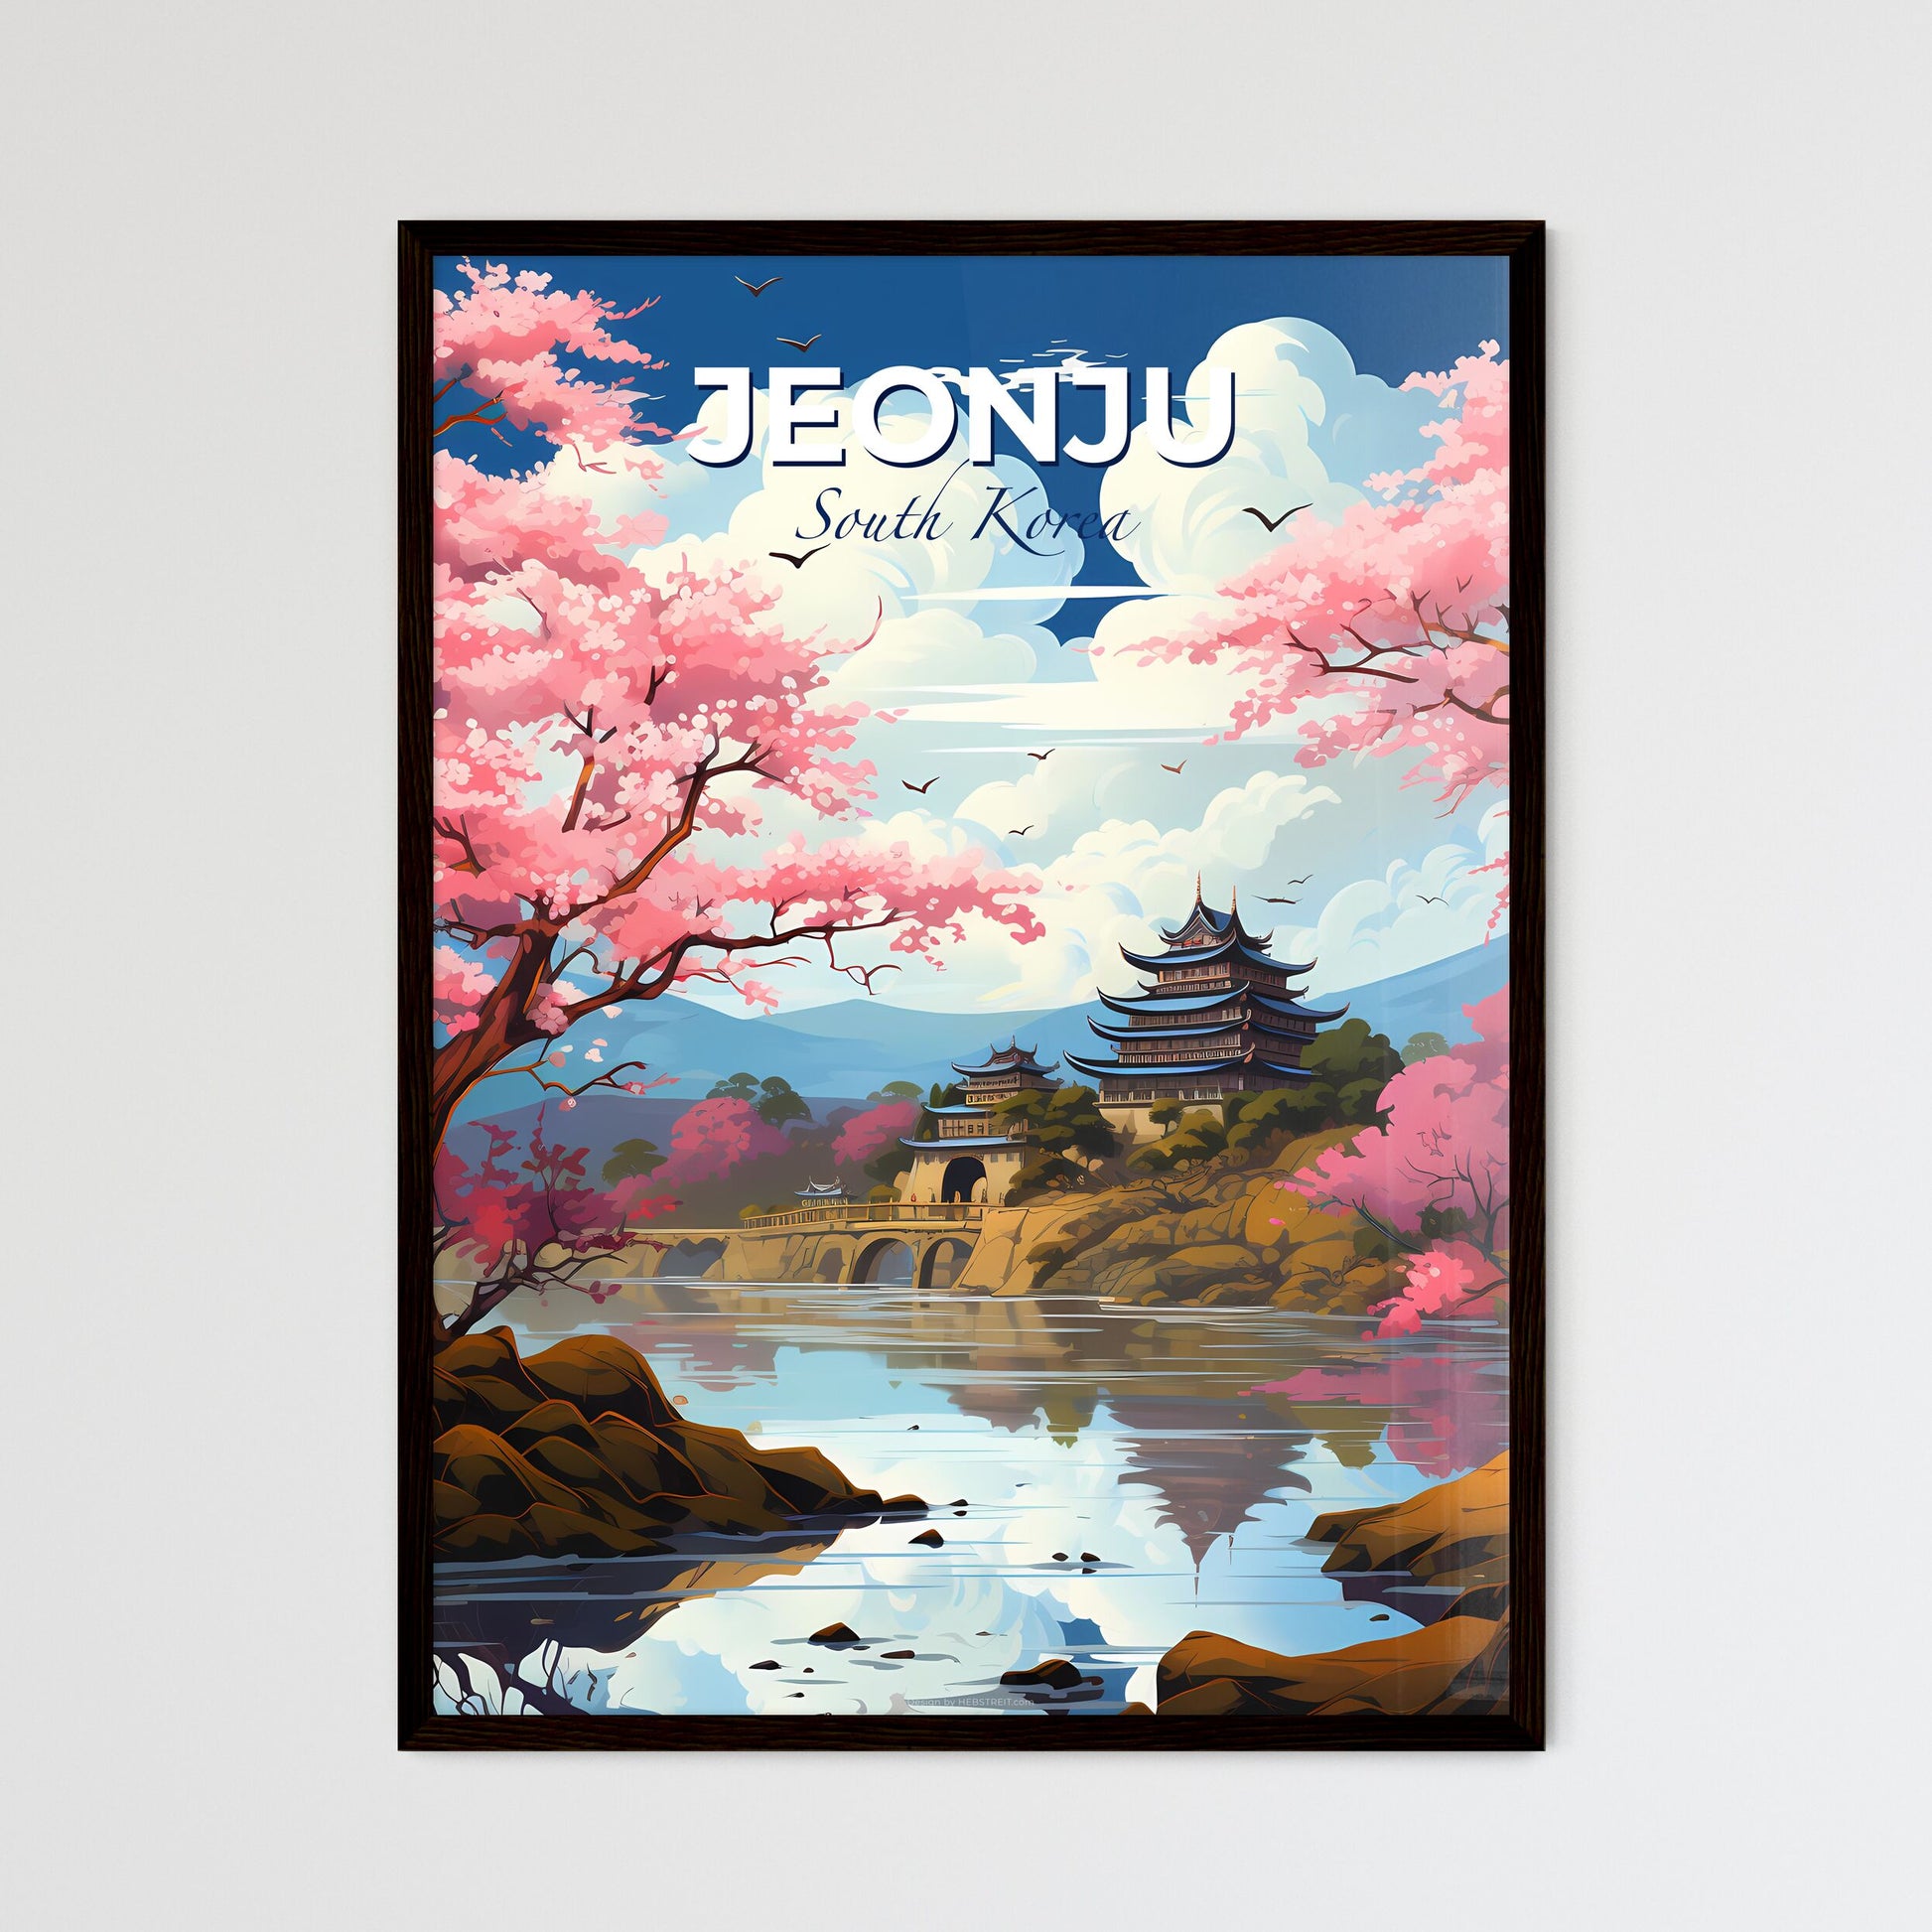 Panoramic Skyline of Jeonju South Korea with Lake, Pagoda, and Vibrant Pink Trees in Abstract Painting Style Default Title